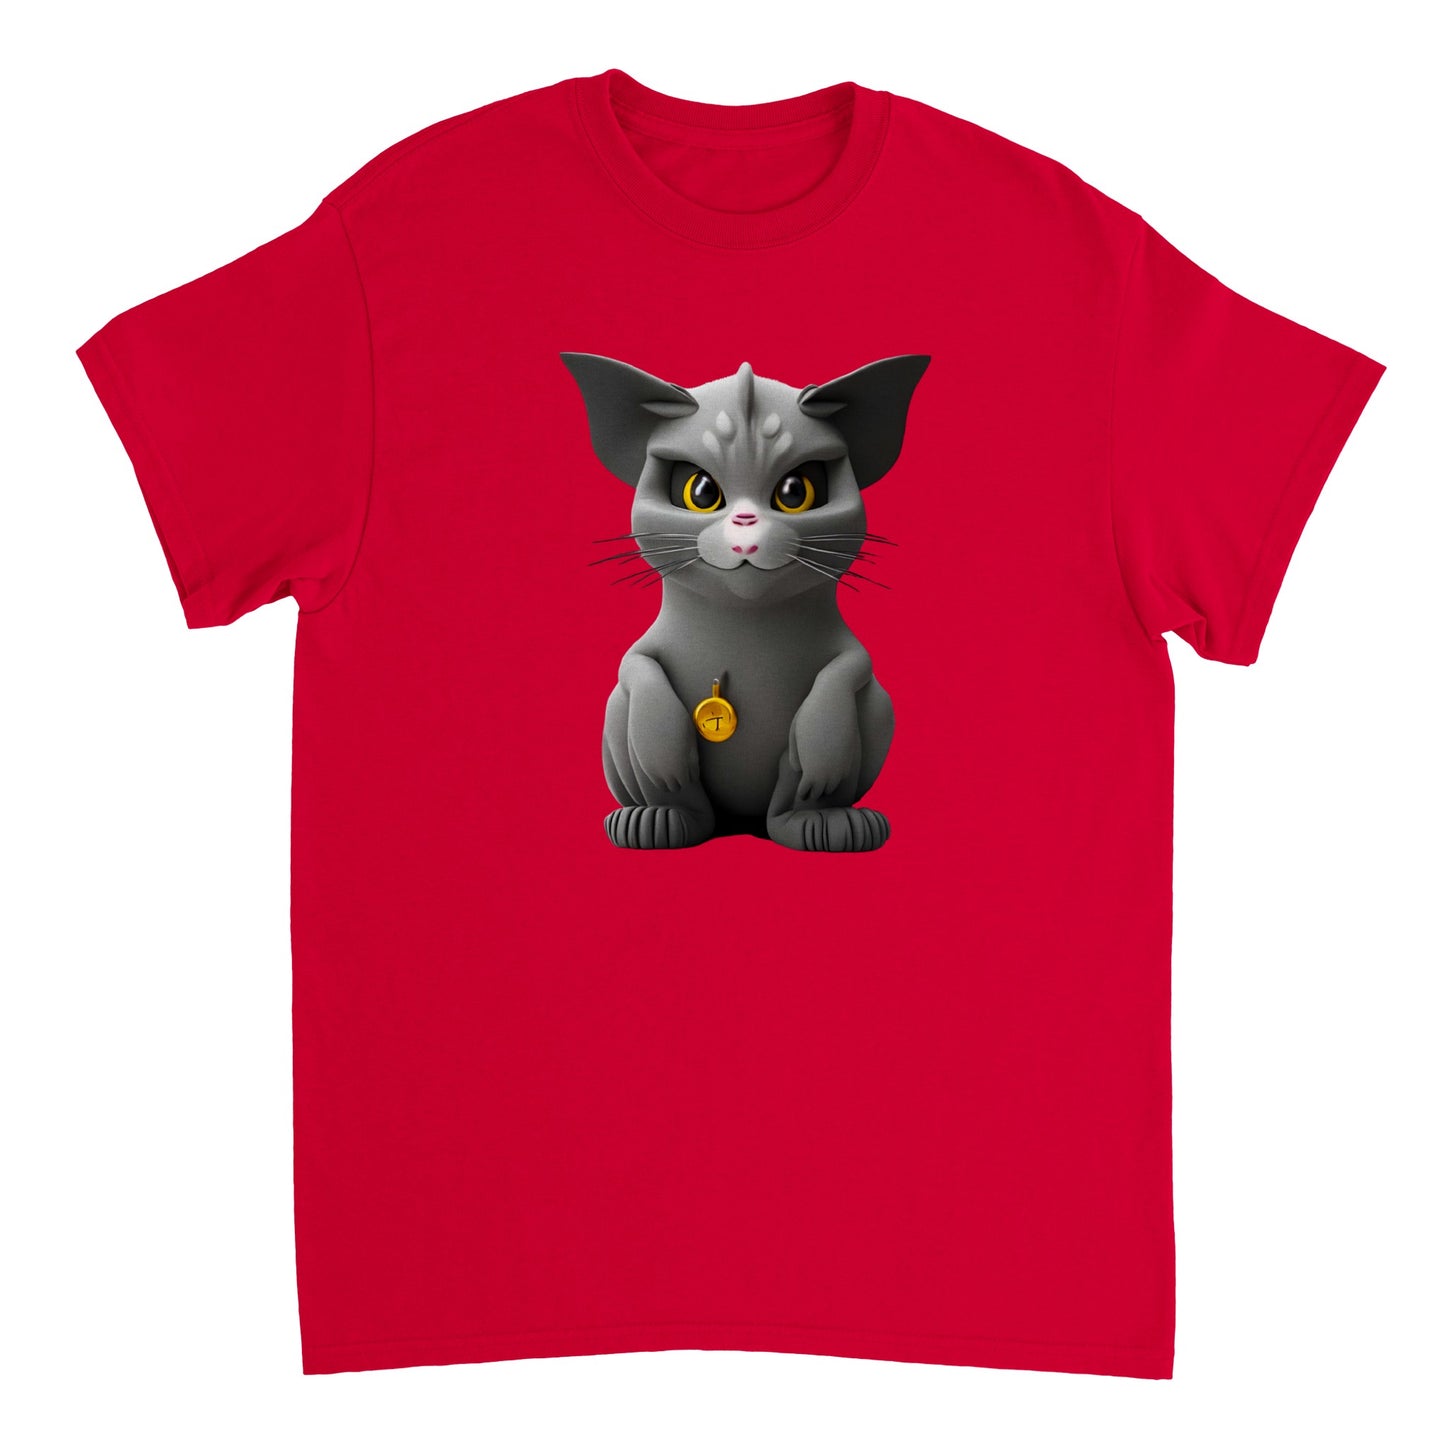 Adorable, Cool, Cute Cats and Kittens Toy - Heavyweight Unisex Crewneck T-shirt 62